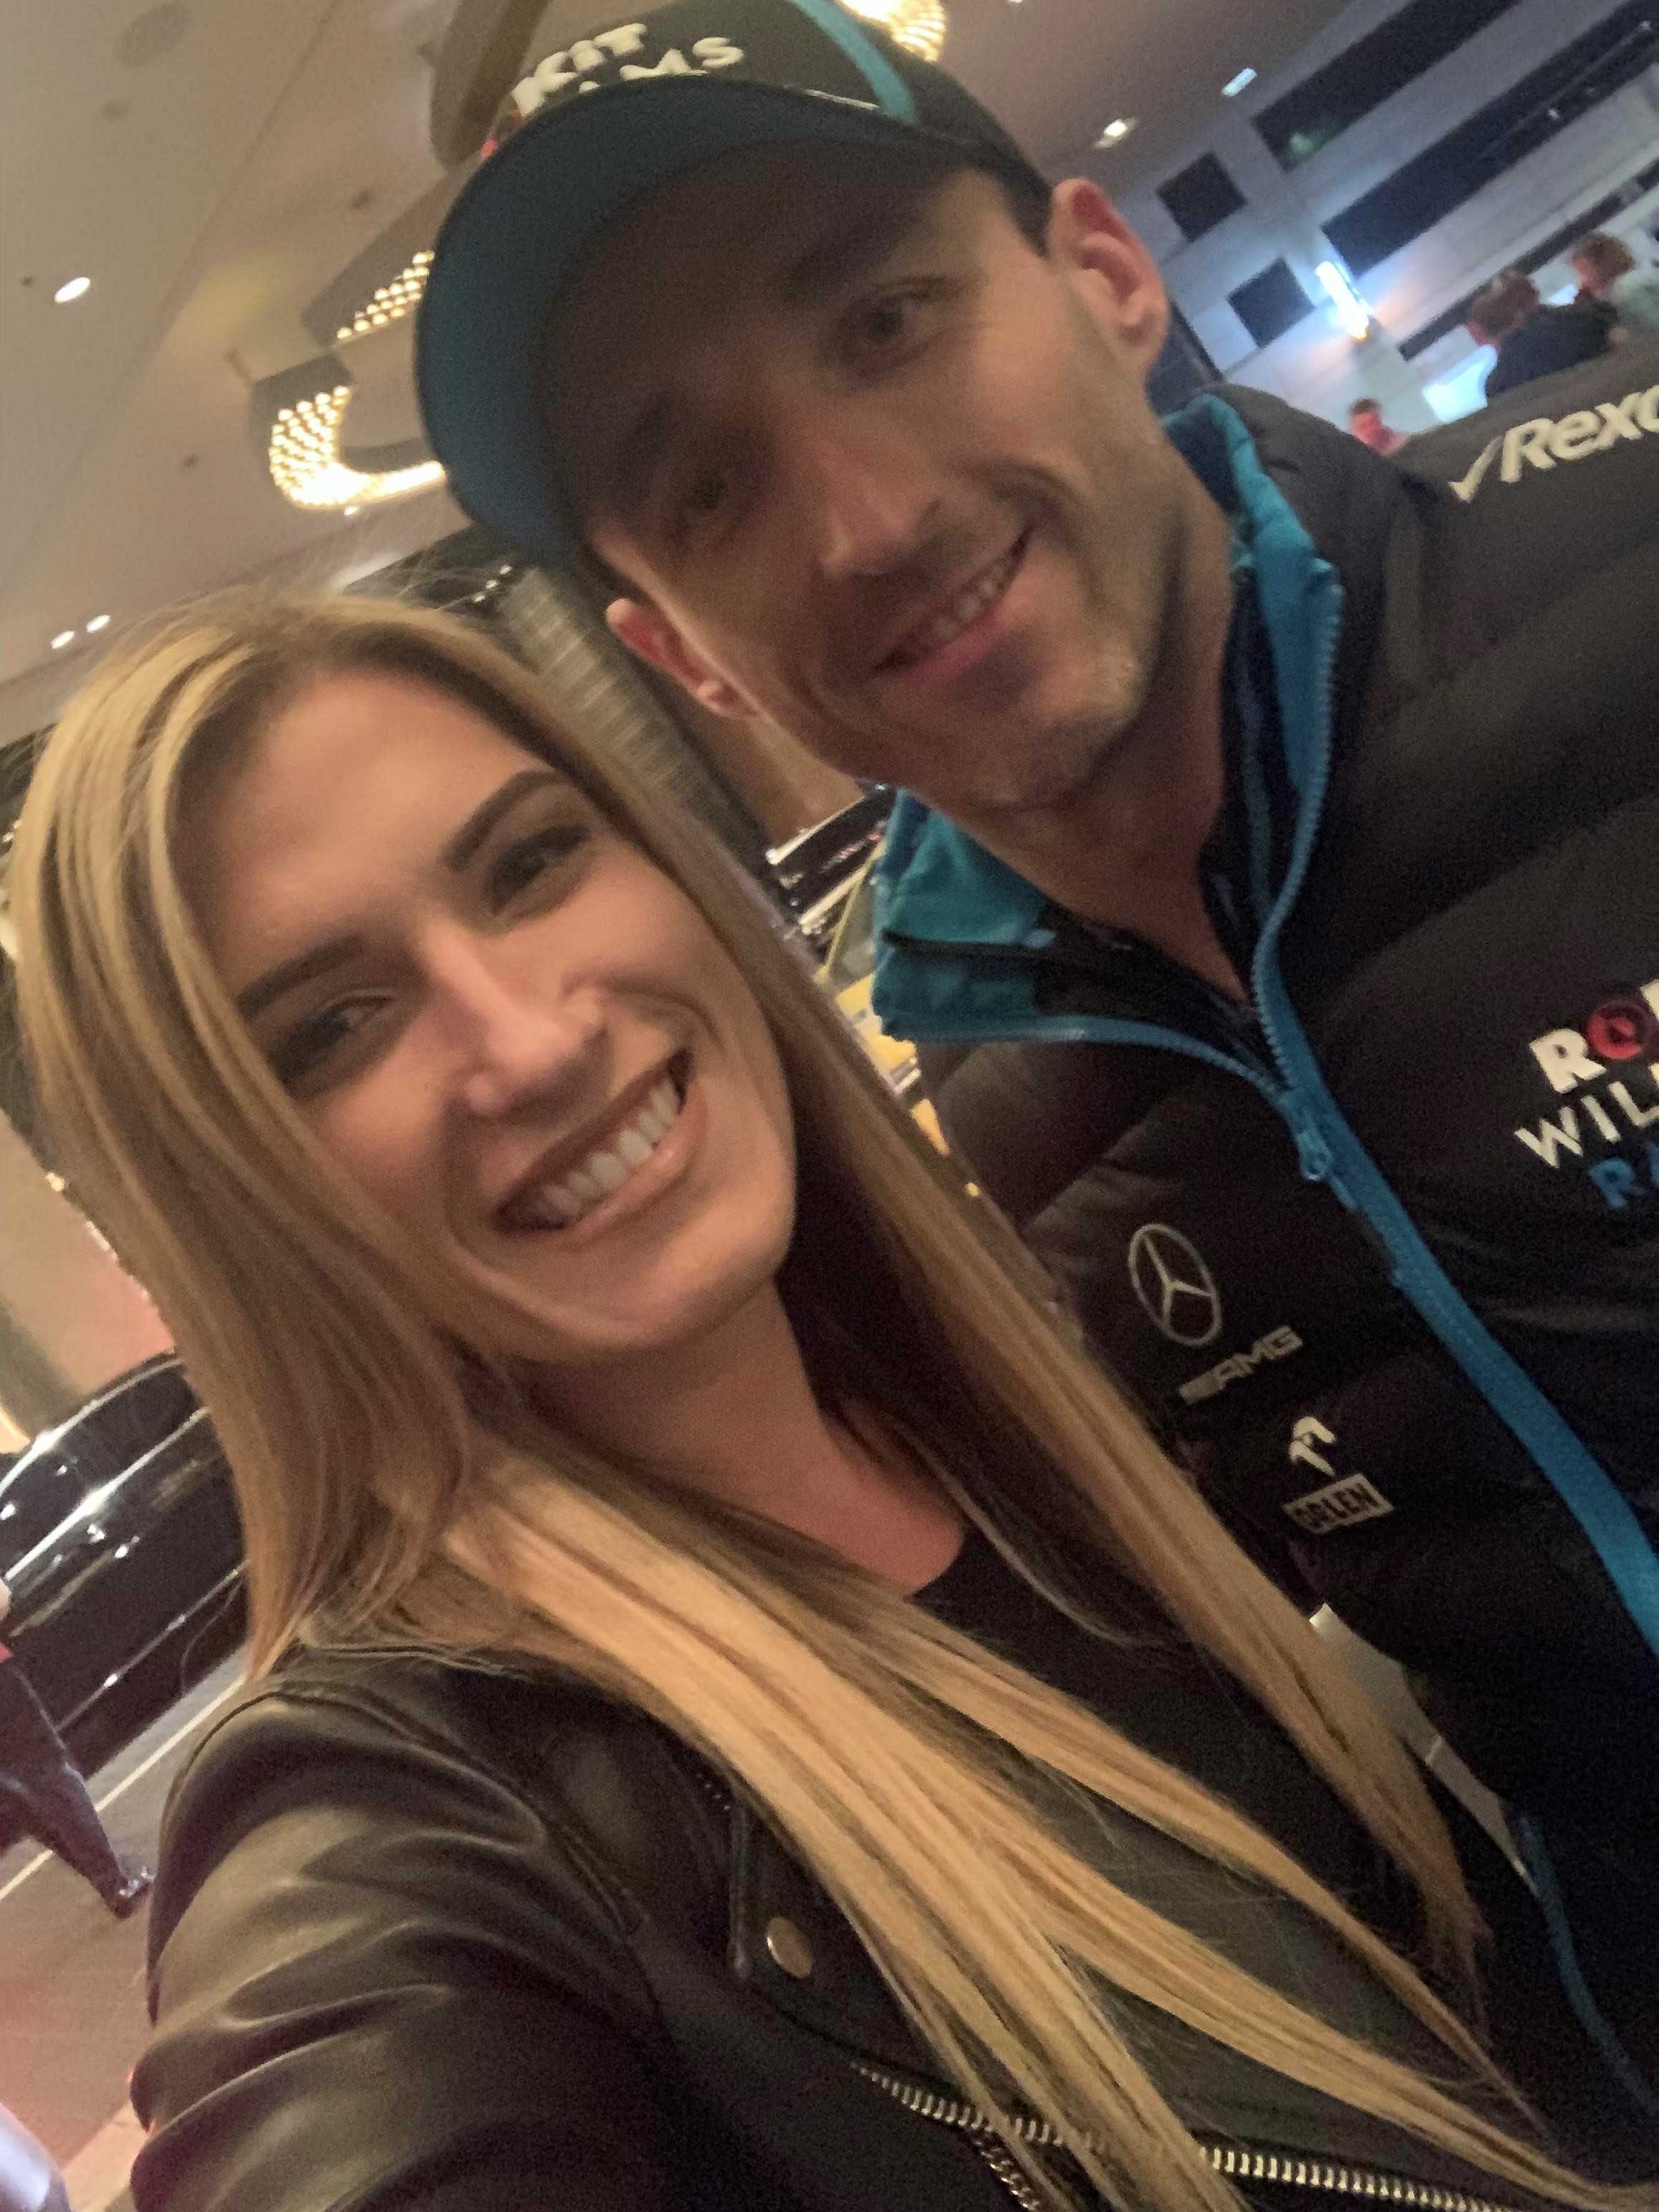 Robert Kubica with a girl in Melbourne on March 17, 2019.